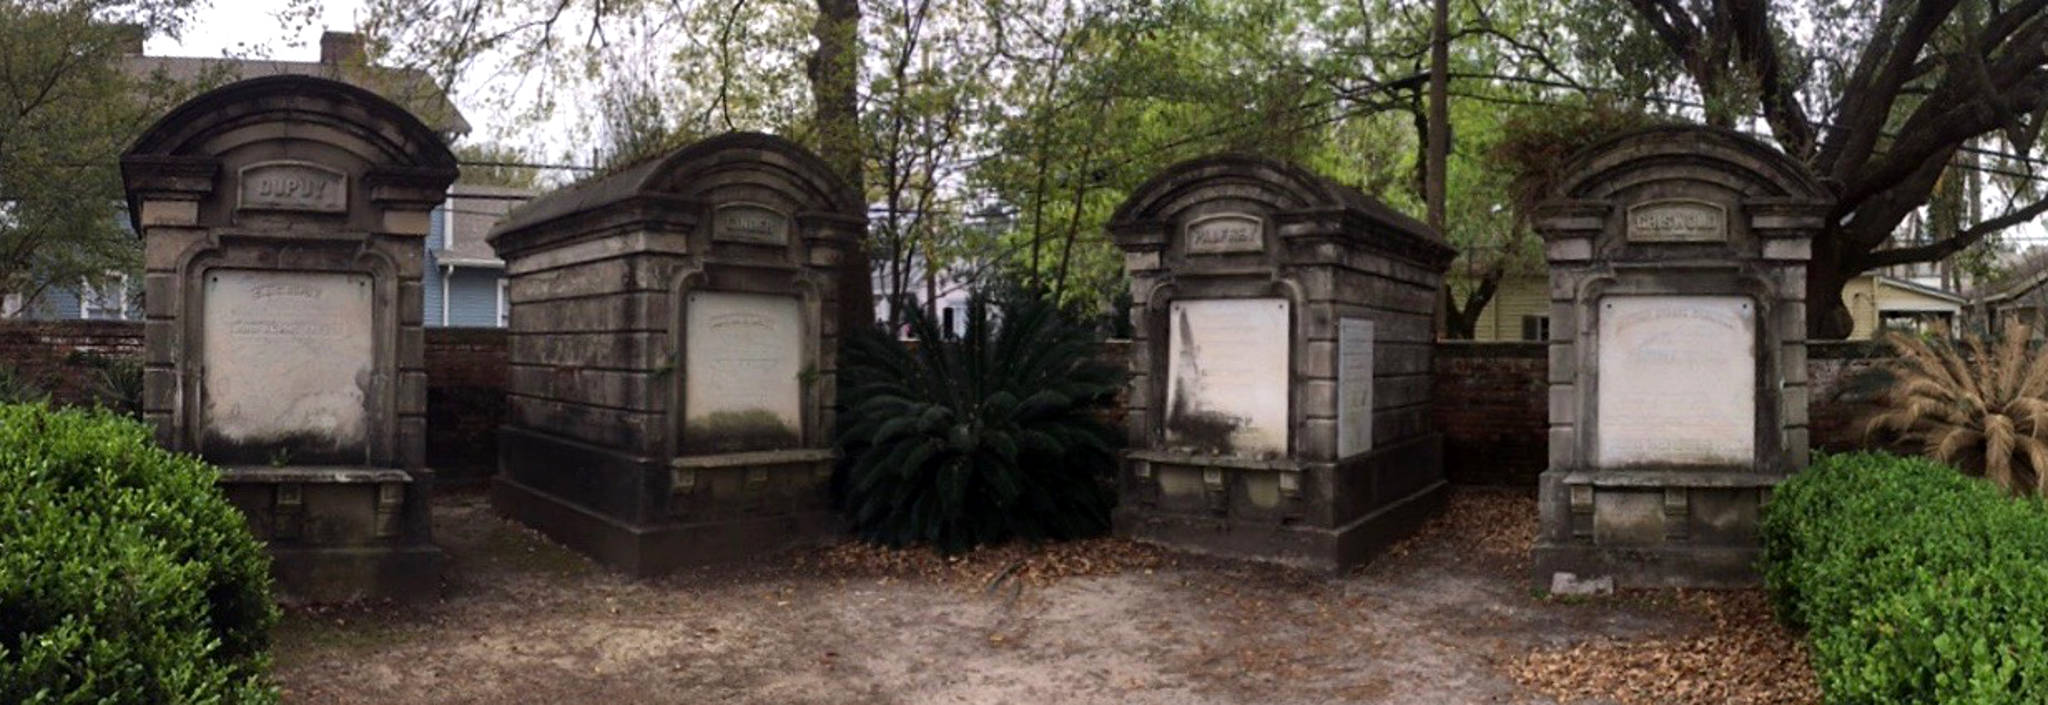 You can tell these graves are haunted because they are slightly out of focus.